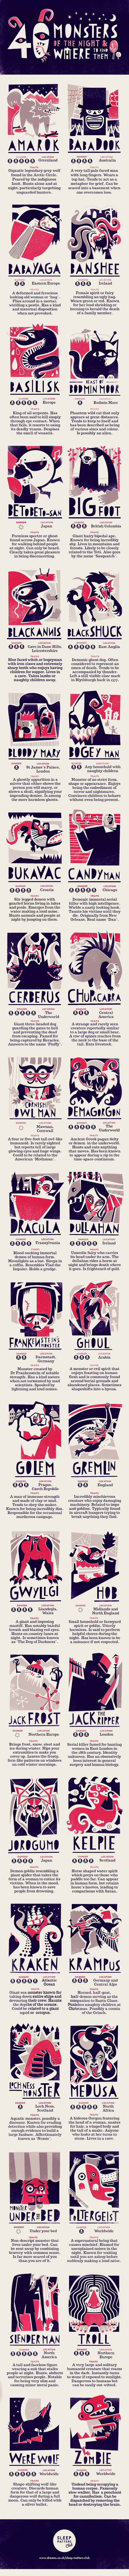 40 Frightening Monsters From Around The World | Daily Infographic